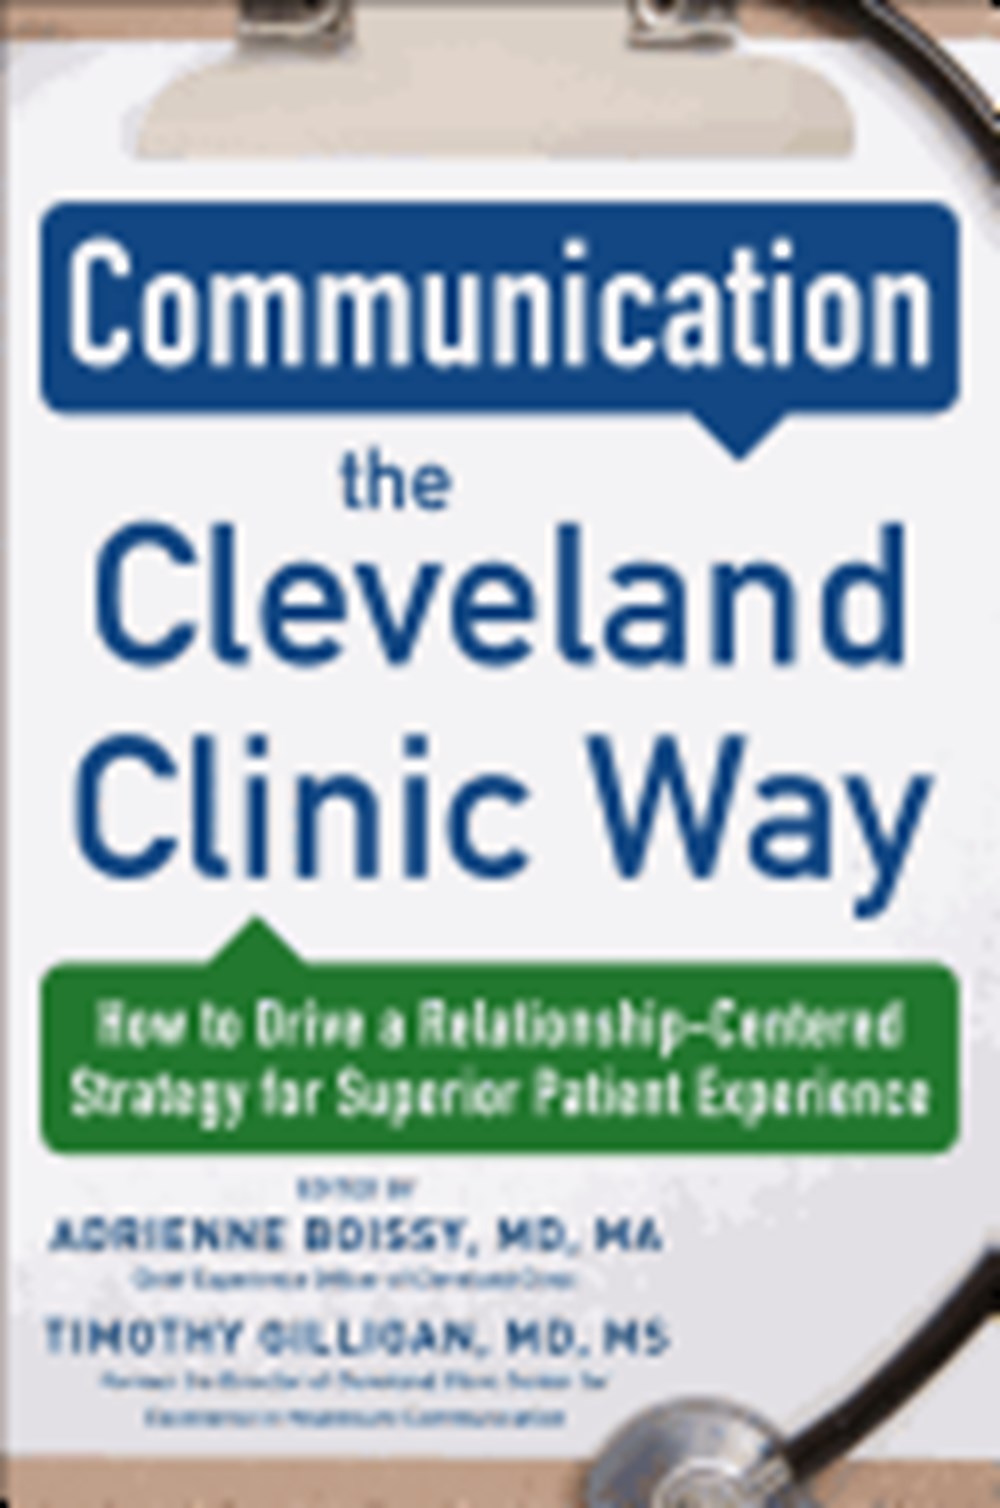 Communication the Cleveland Clinic Way How to Drive a Relationship-Centered Strategy for Exceptional